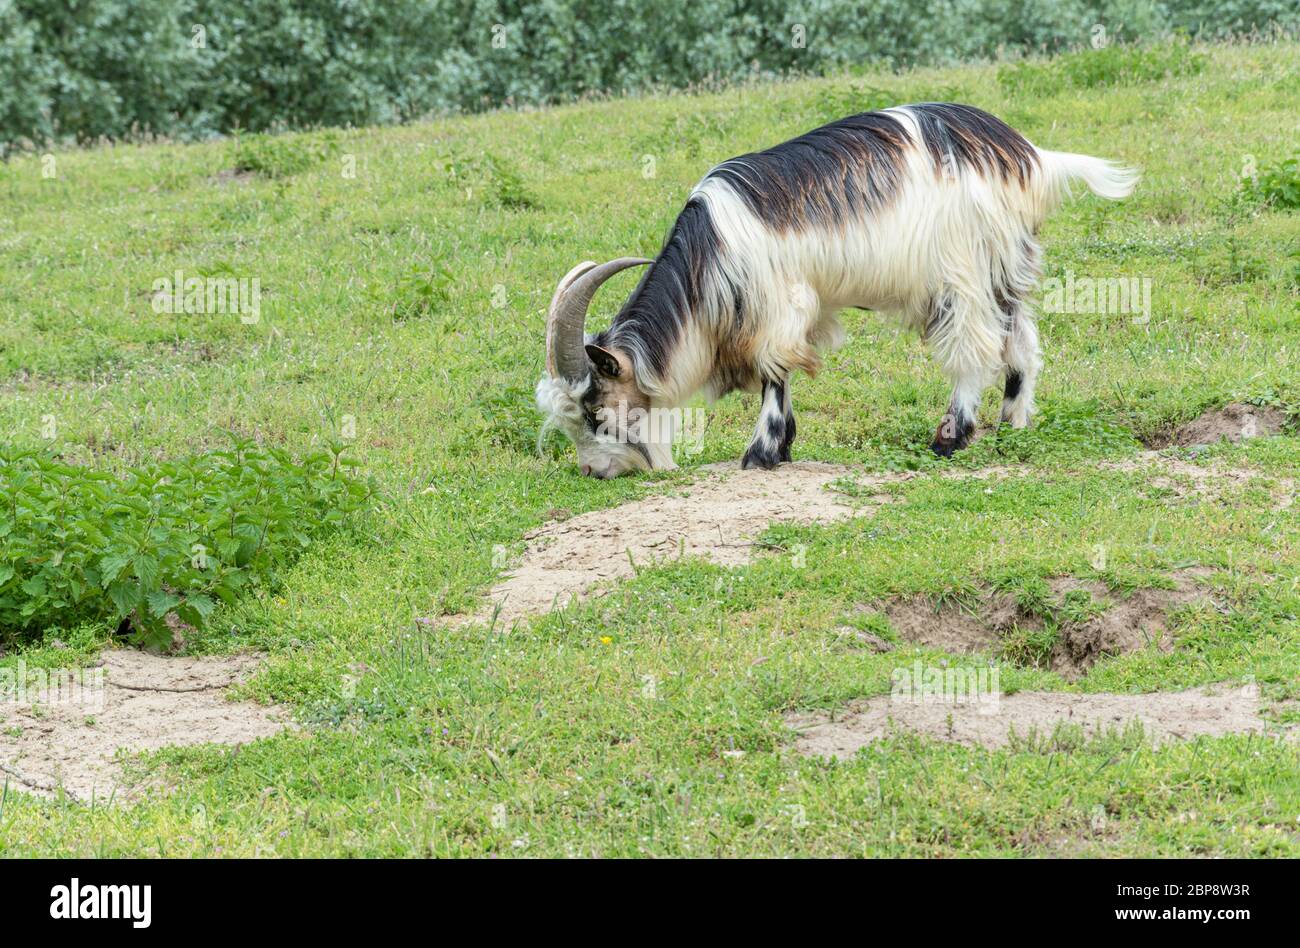 Belgian goat breed The Flemish goat grazes in the meadow Stock Photo